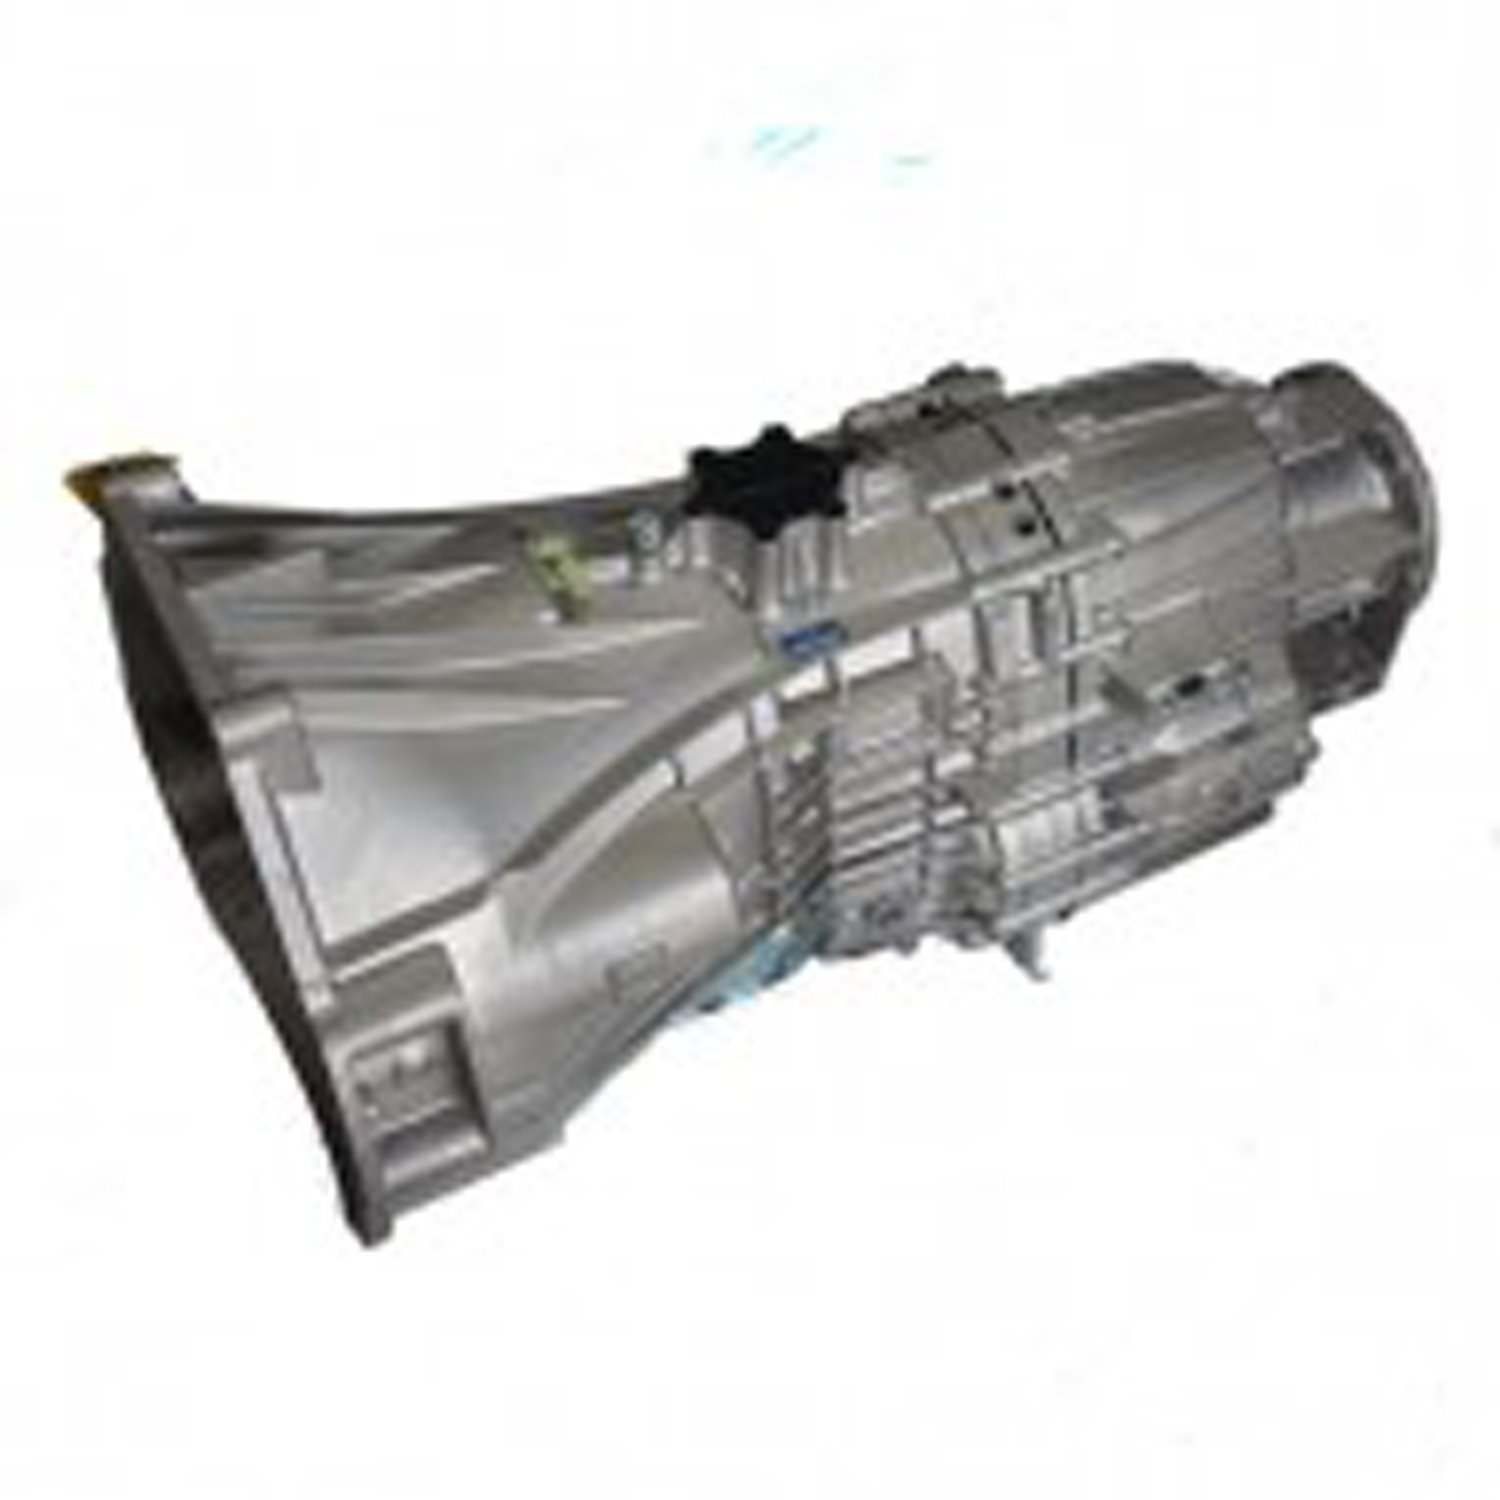 Remanufactured S6-S650F Manual Transmission for Ford 02-04 F-series 5.4L & 6.8L, 6 Speed